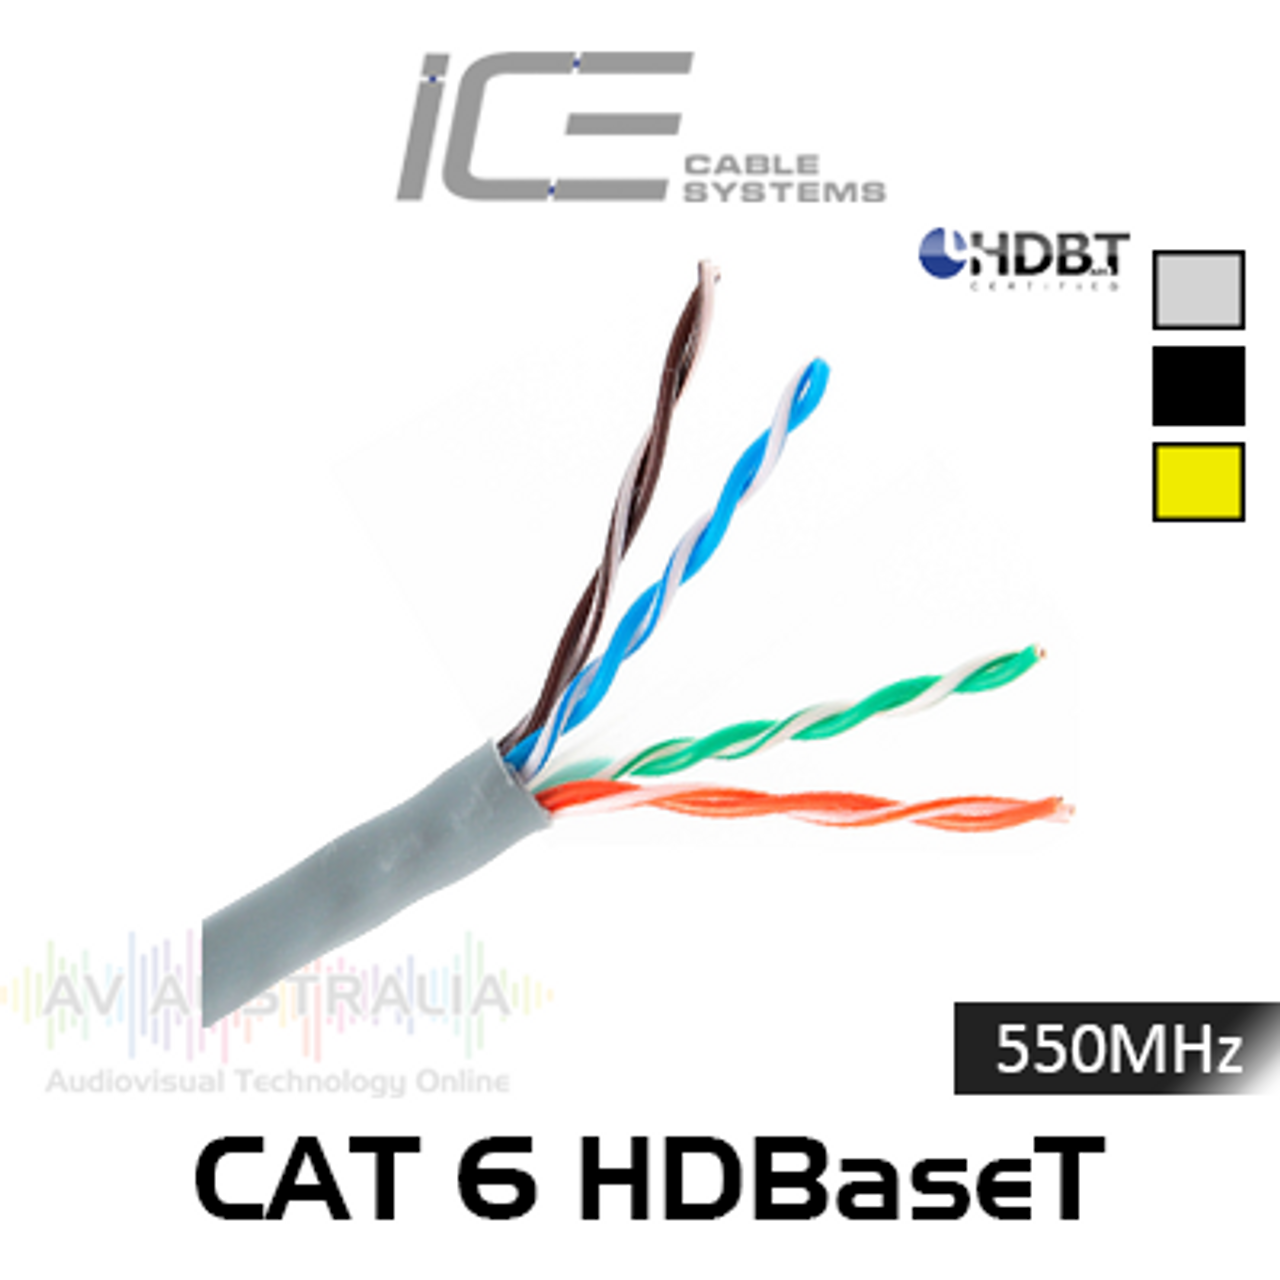 ICE Cat 6 550Mhz HDBaseT Certified 305M Cable Box